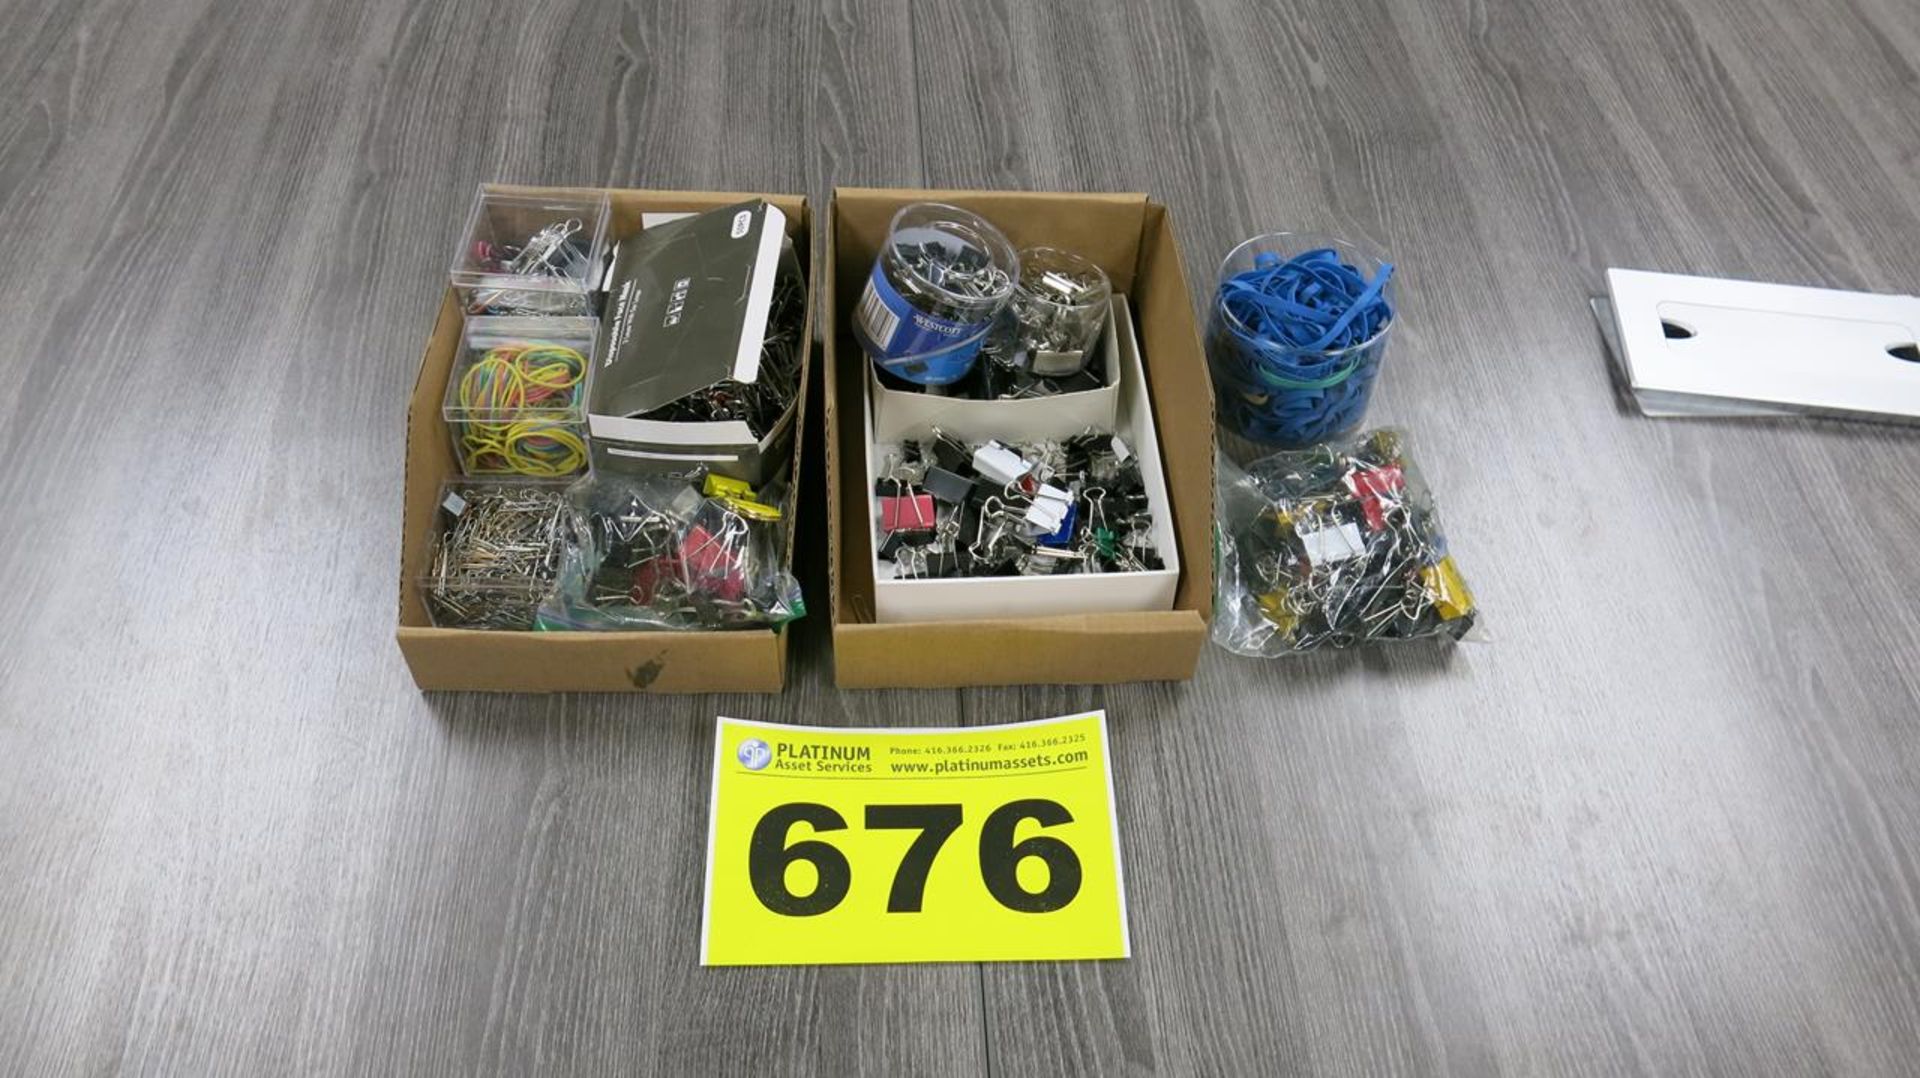 LOT OF OFFICE SUPPLIES, PAPERCLIPS, ELASTICS, ETC.